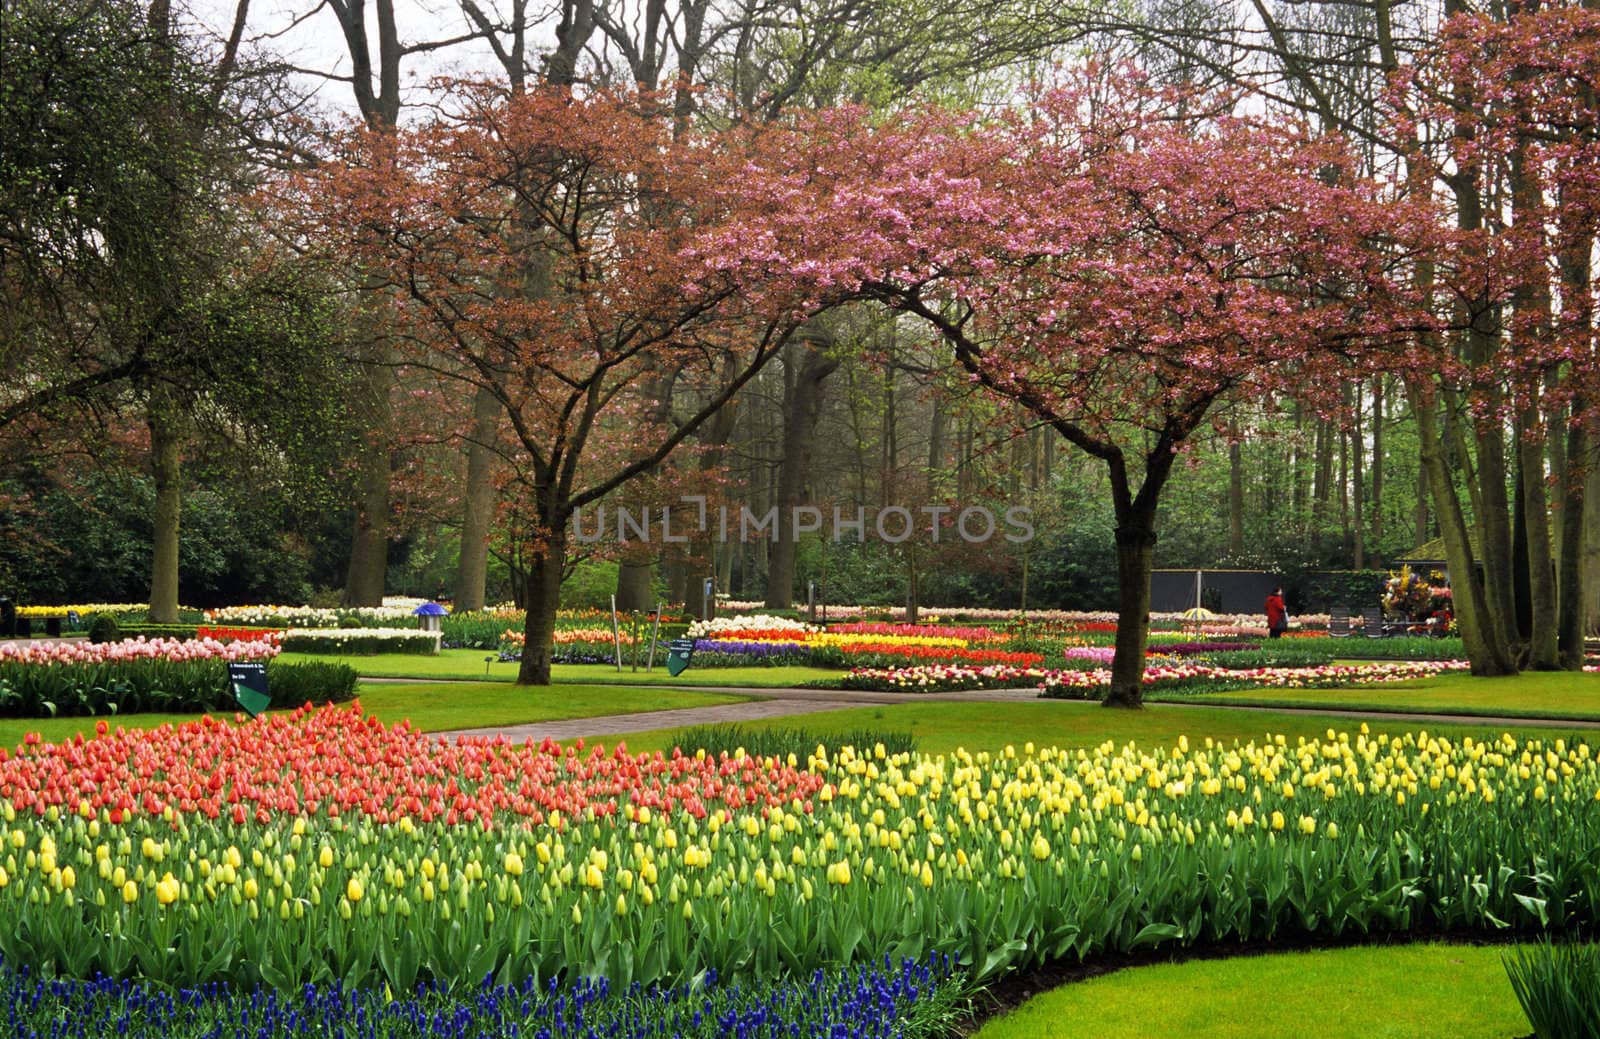 Trees and bulbs bloom and flower in springtime at Keukenhof Gardens in Lisse, the Netherlands.